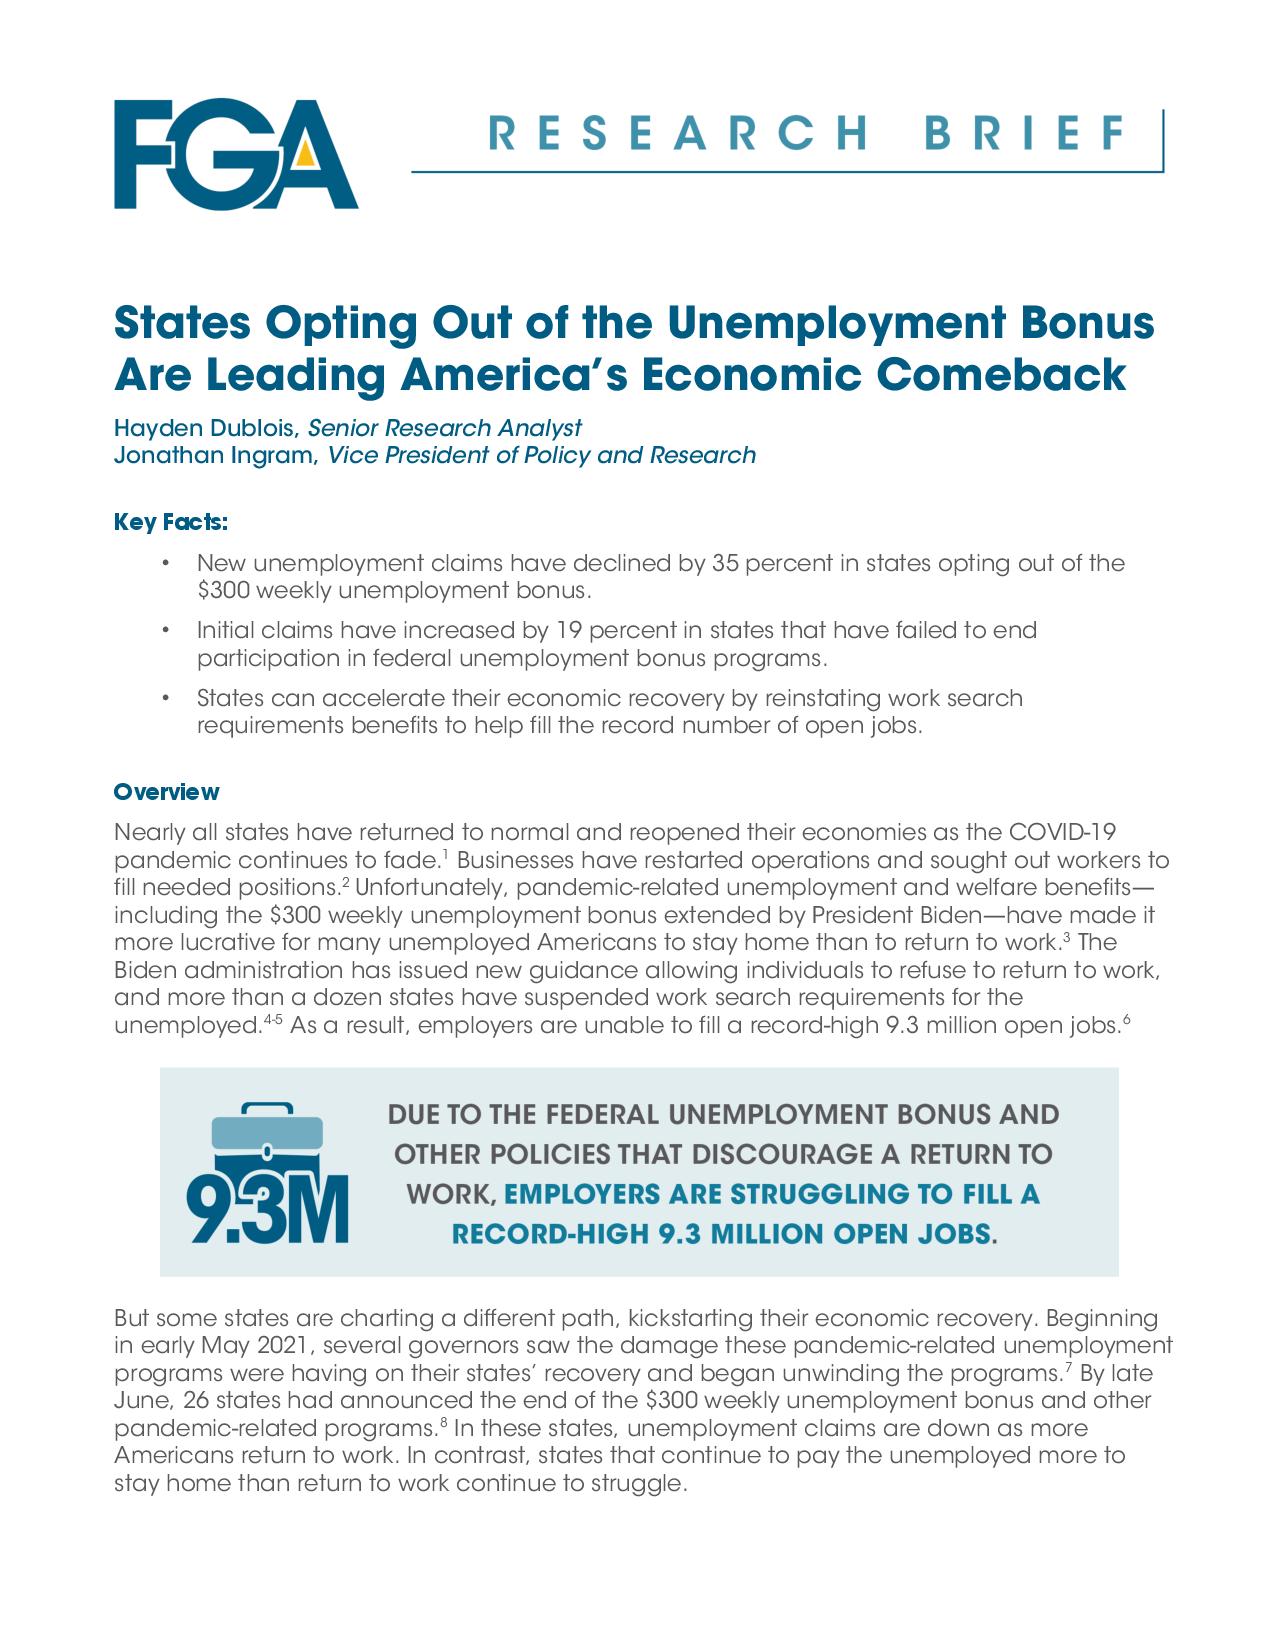 States Opting Out of the Unemployment Bonus Are Leading America’s Economic Comeback